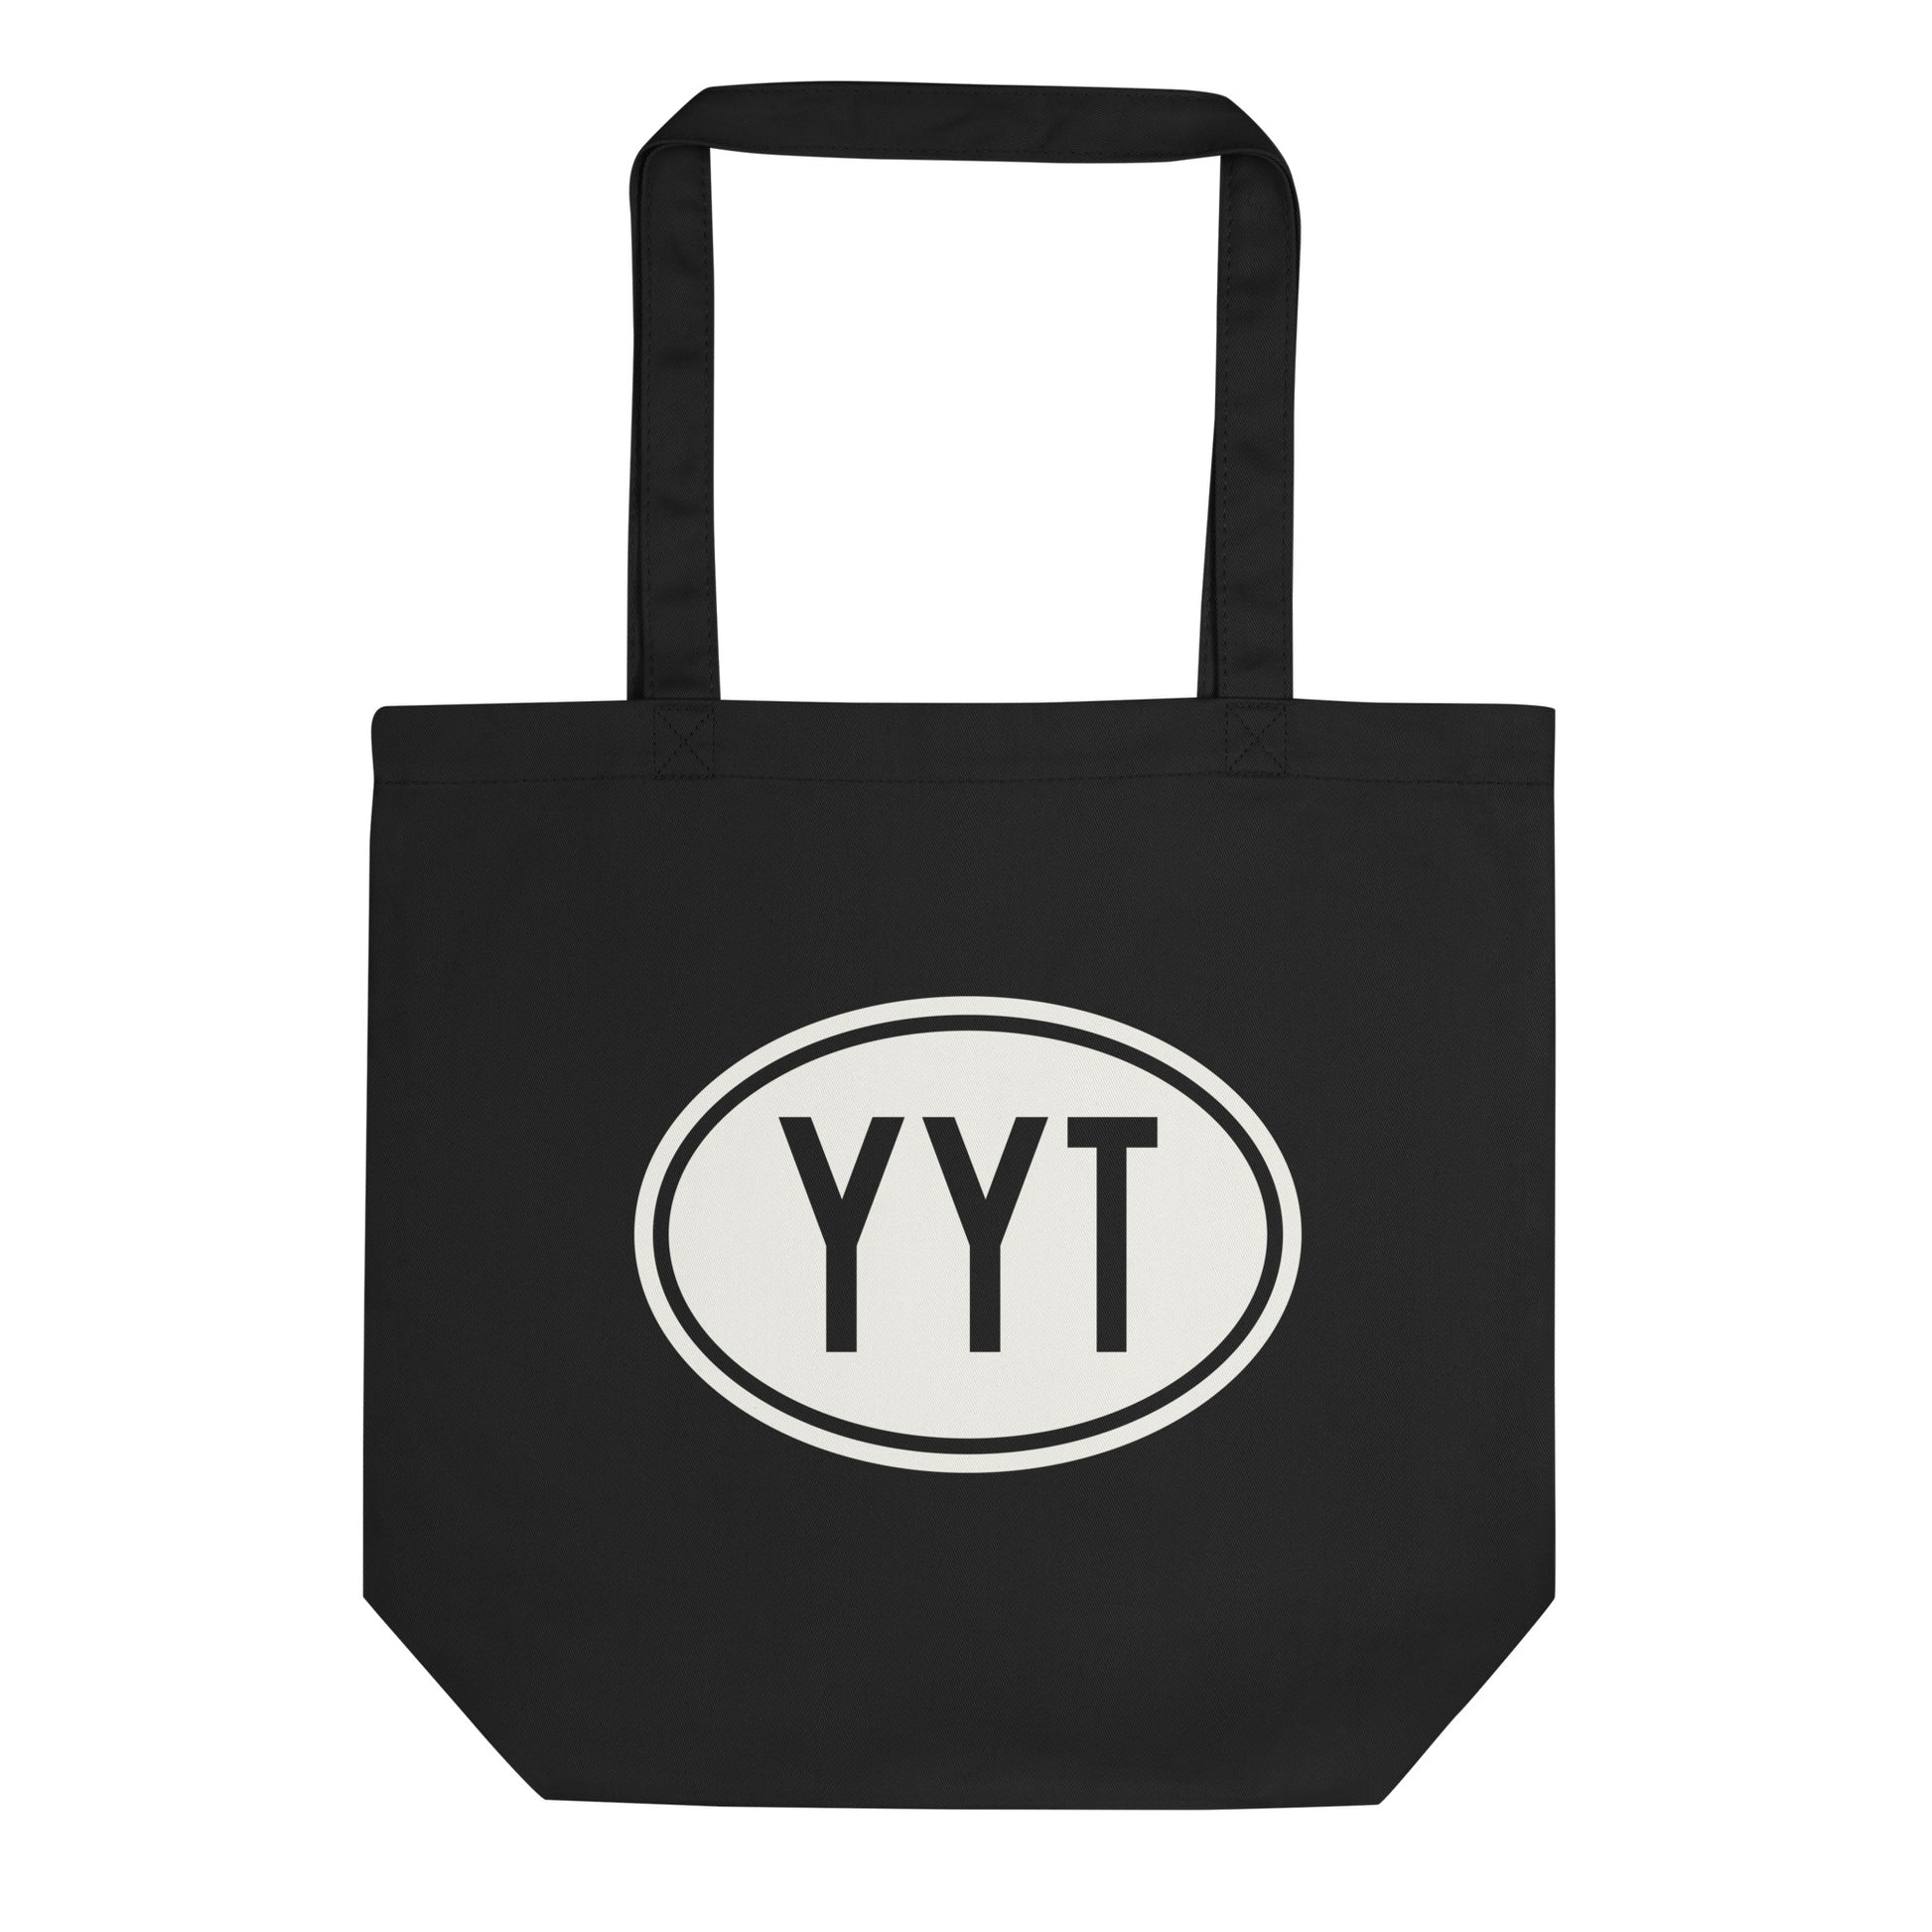 Unique Travel Gift Organic Tote - White Oval • YYT St. John's • YHM Designs - Image 01